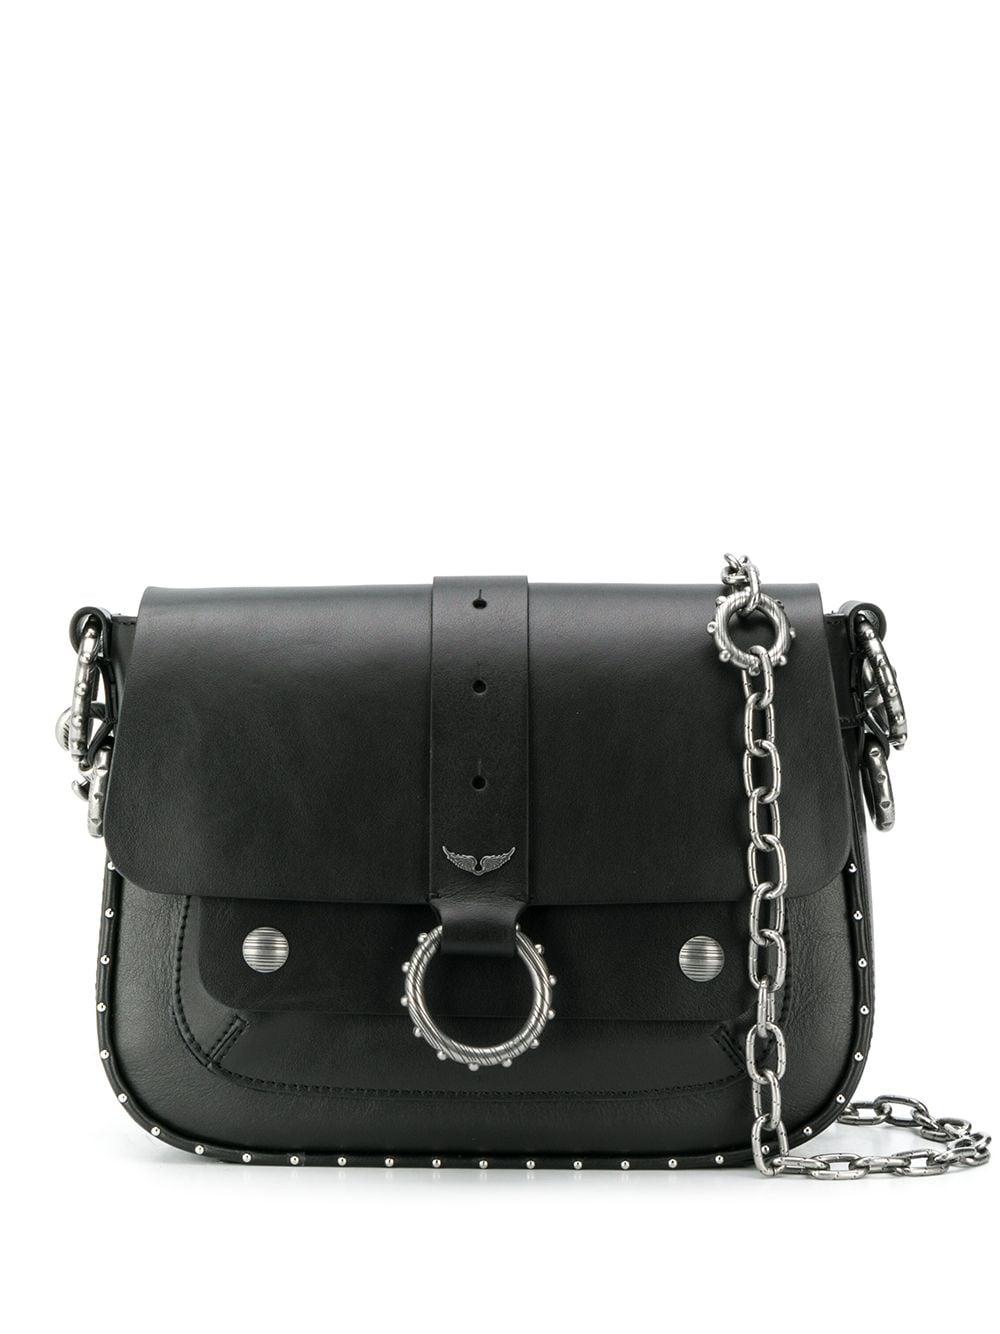 Zadig & Voltaire X Kate Moss Kate Crossbody Bag in Black | Lyst